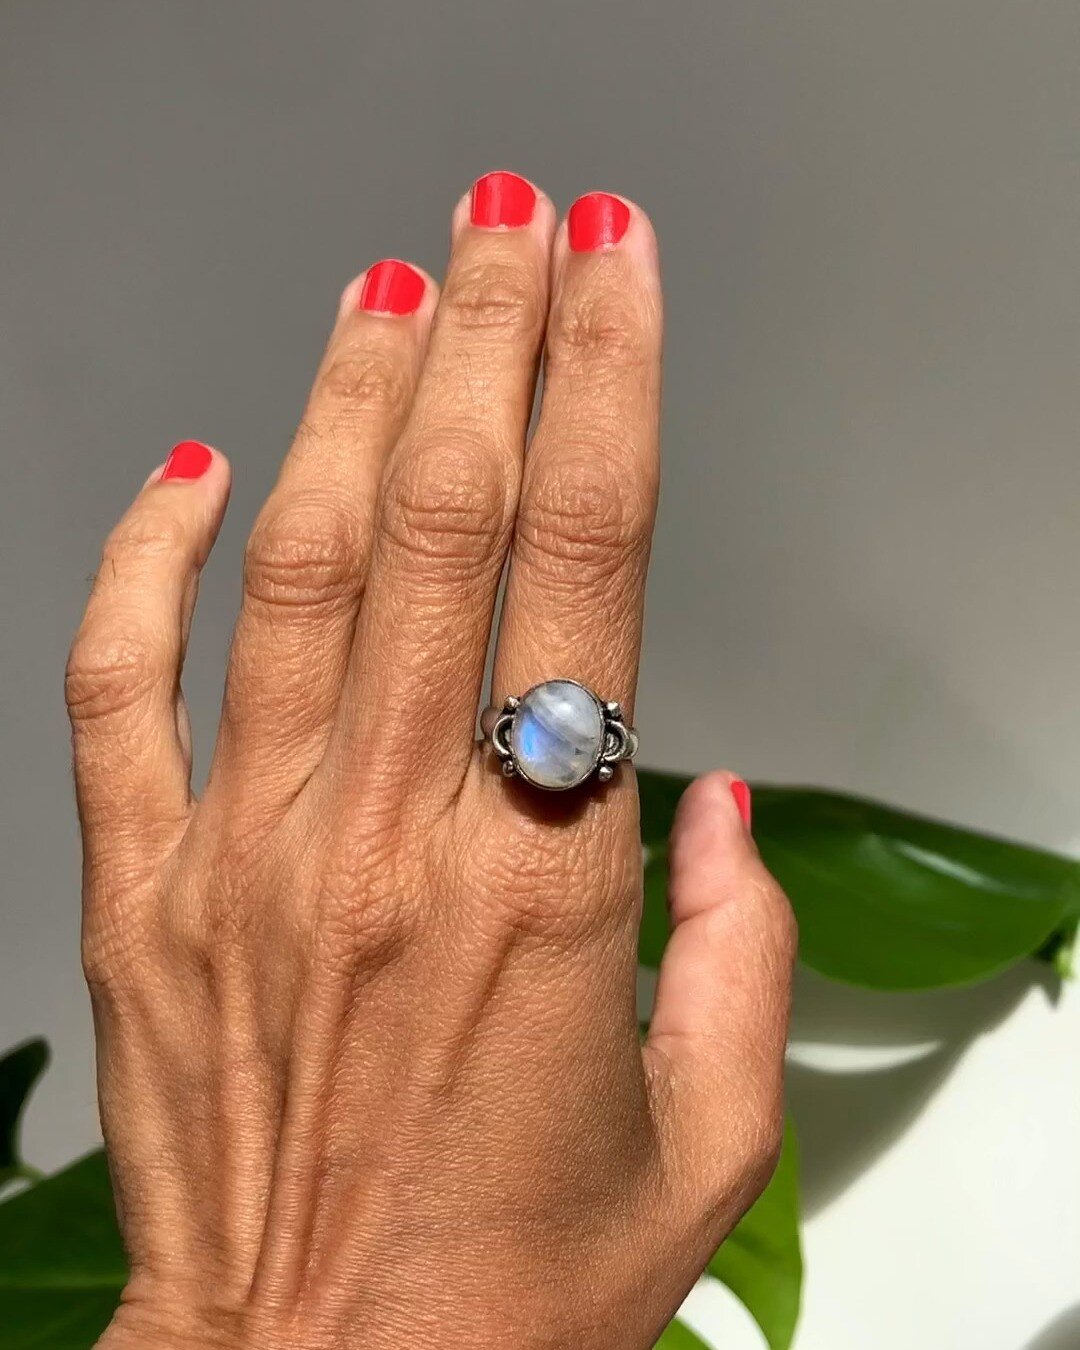 Holy moly, it's blue lightning!

1990s silver tone ring with violet-flash moonstone solitaire. US size 7. 

Pricing and more pics at abriefhistoryvintage.com/jewellery &amp; www.etsy.com/ie/shop/ABriefHistoryVintage.
.
.
.
#moonstonering #moonstone #